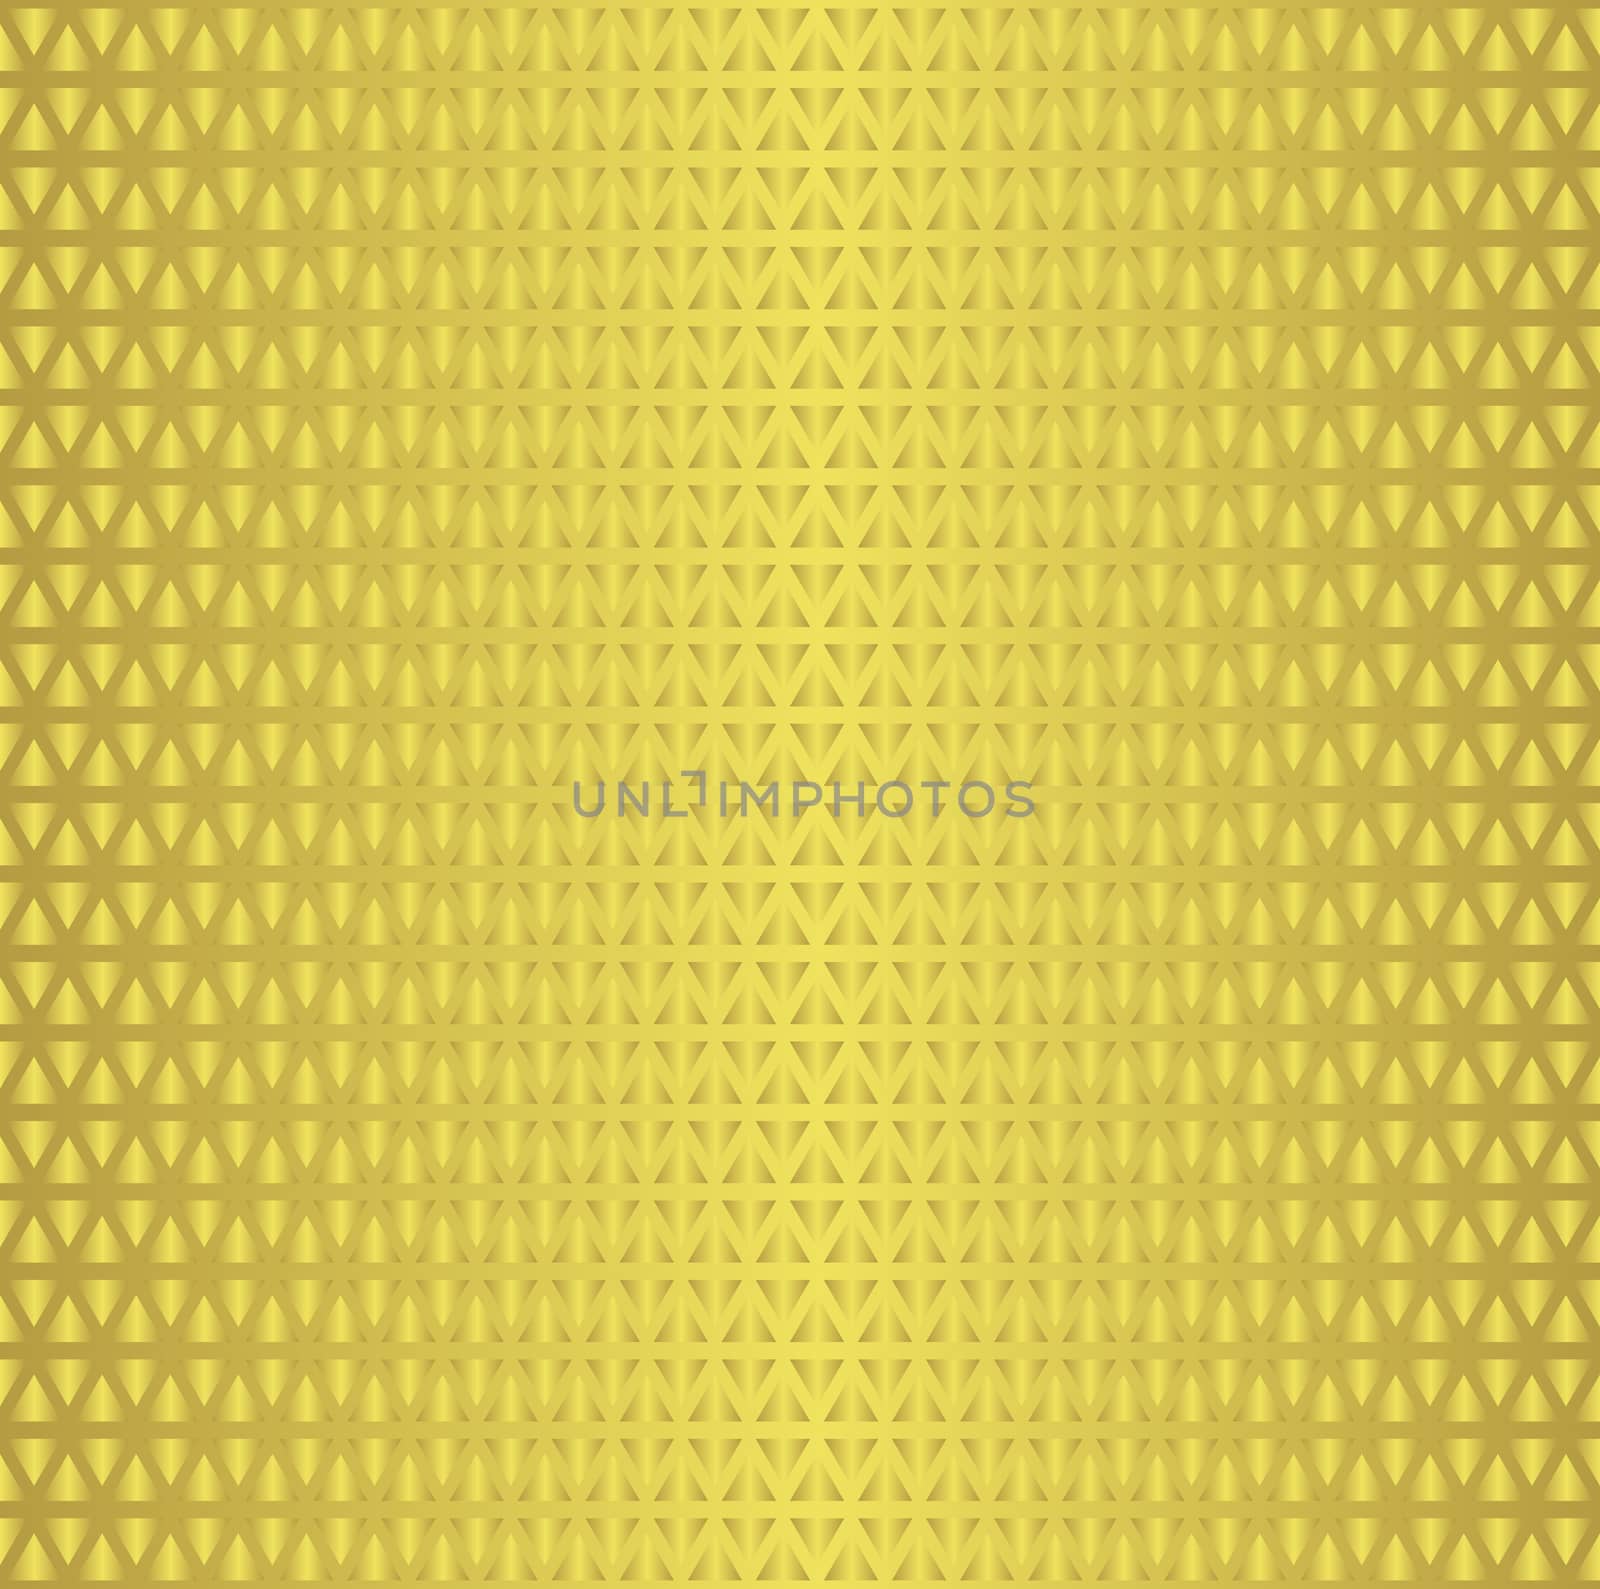 Seamless gold triangle geometric pattern. Retro ornament for textile and print. Vector